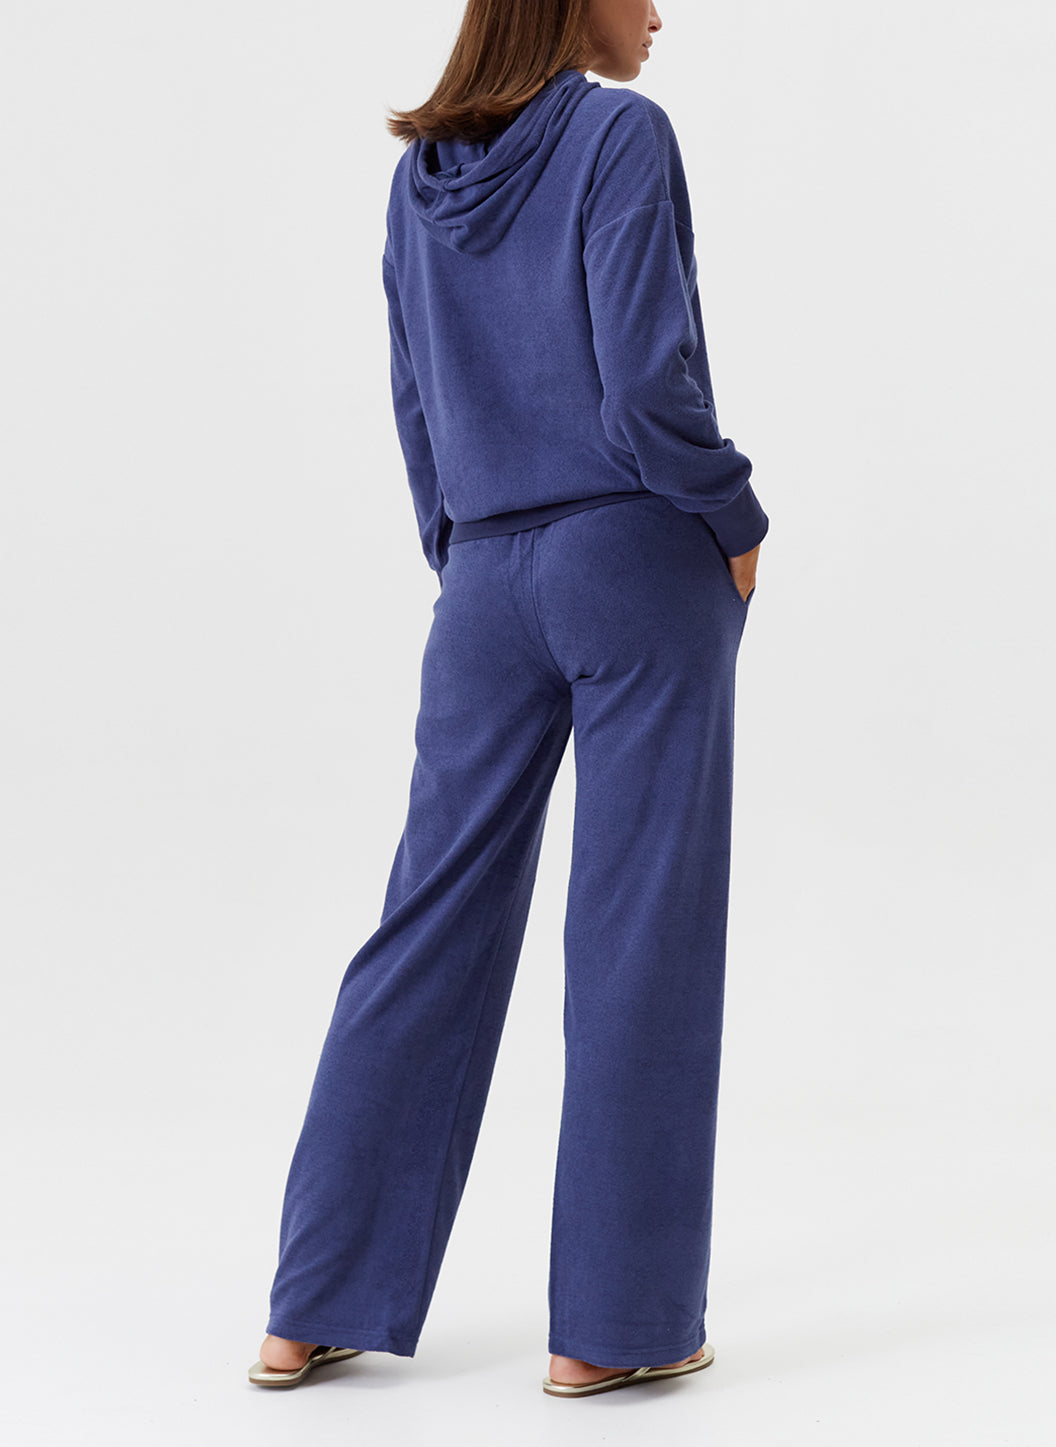 Melissa Odabash Nora Navy Terry Hoodie - 2024 Collection